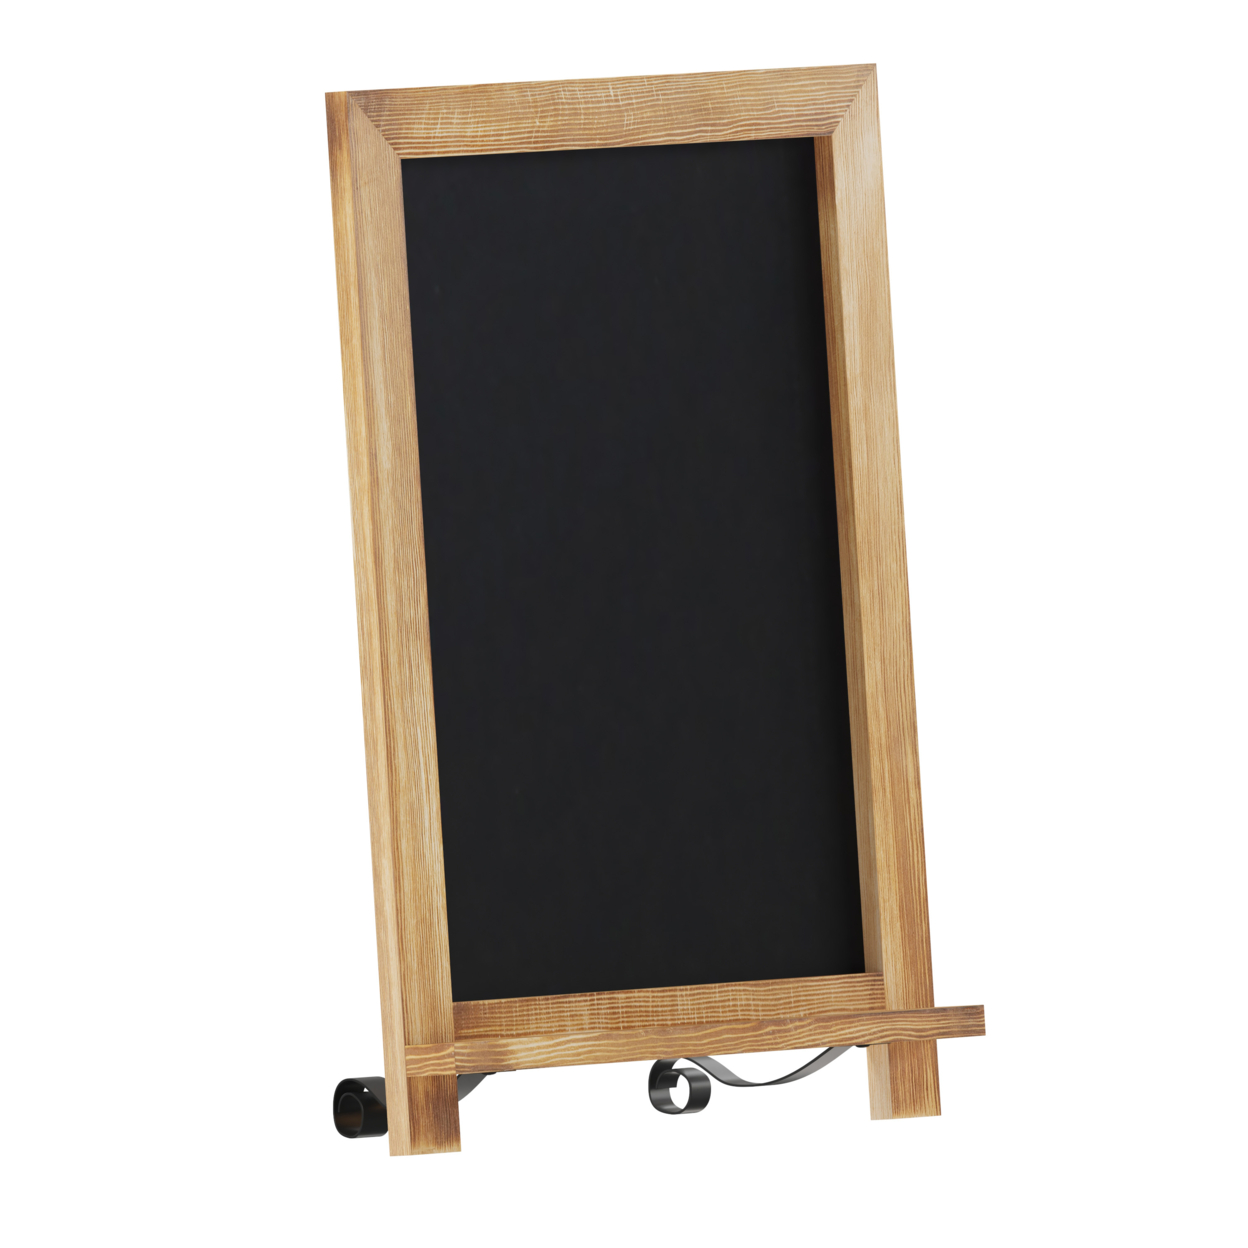 17 Inch Magnetic Chalkboard, Washed White Wood Frame, Metal Scrolled Legs